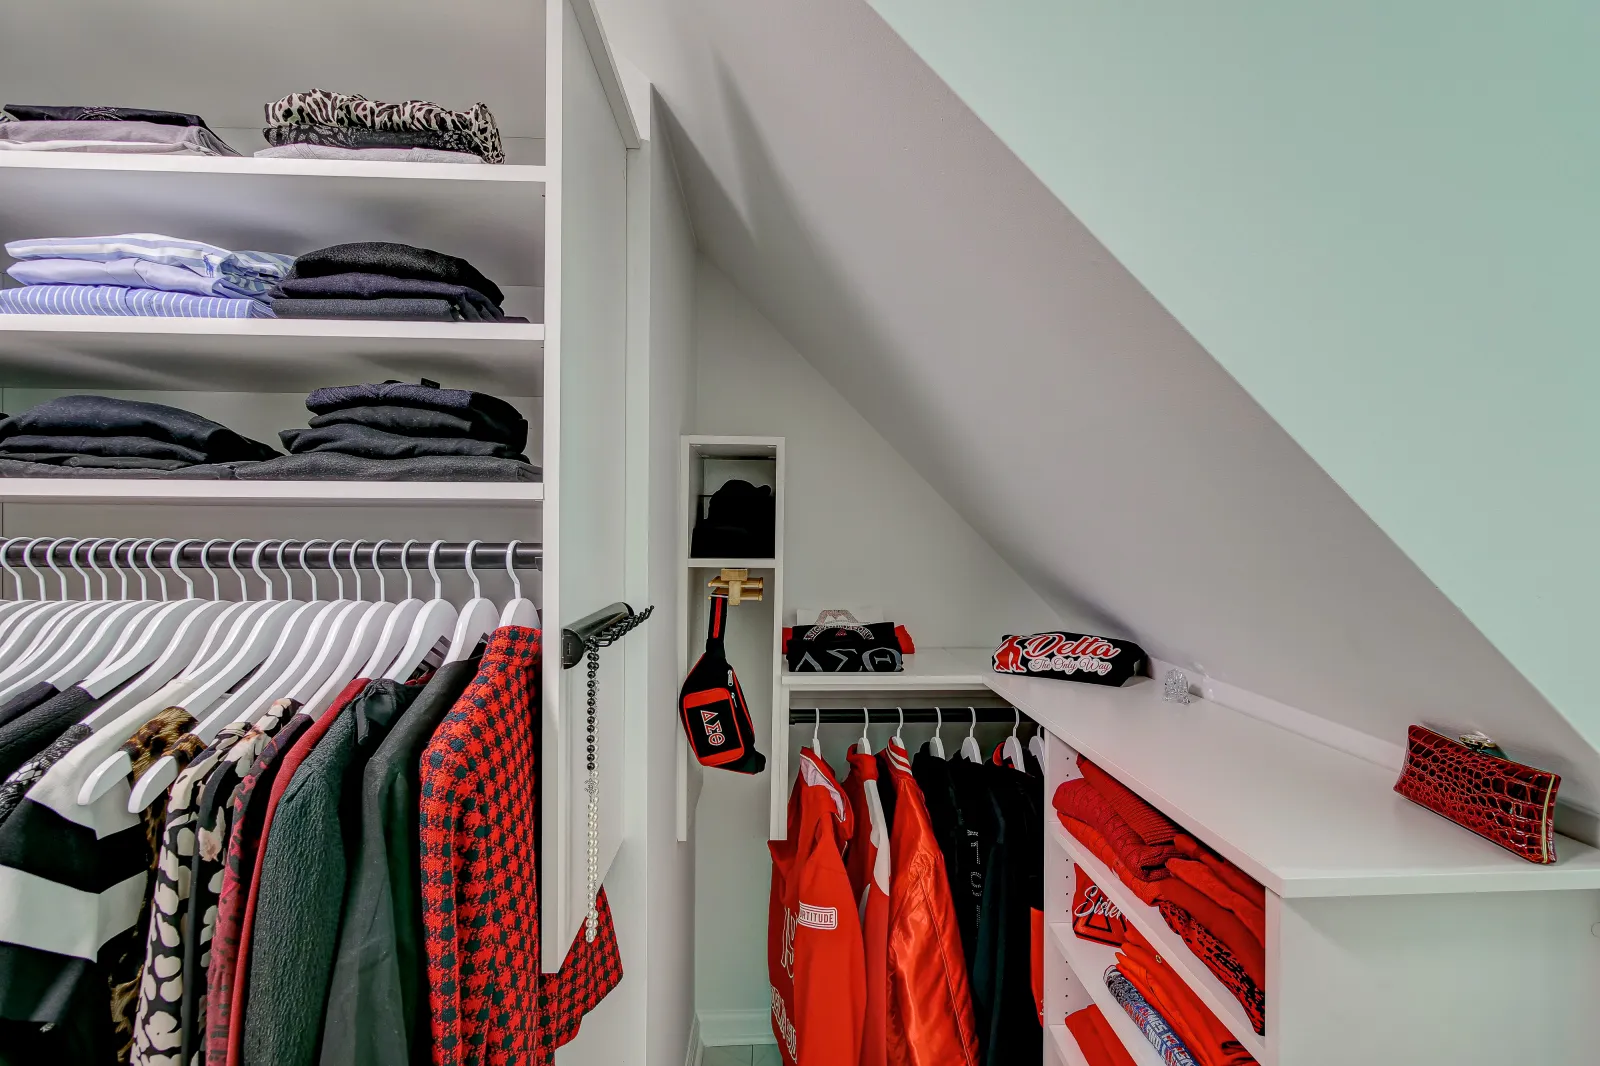 Can you work with small or awkward spaces with custom closets?